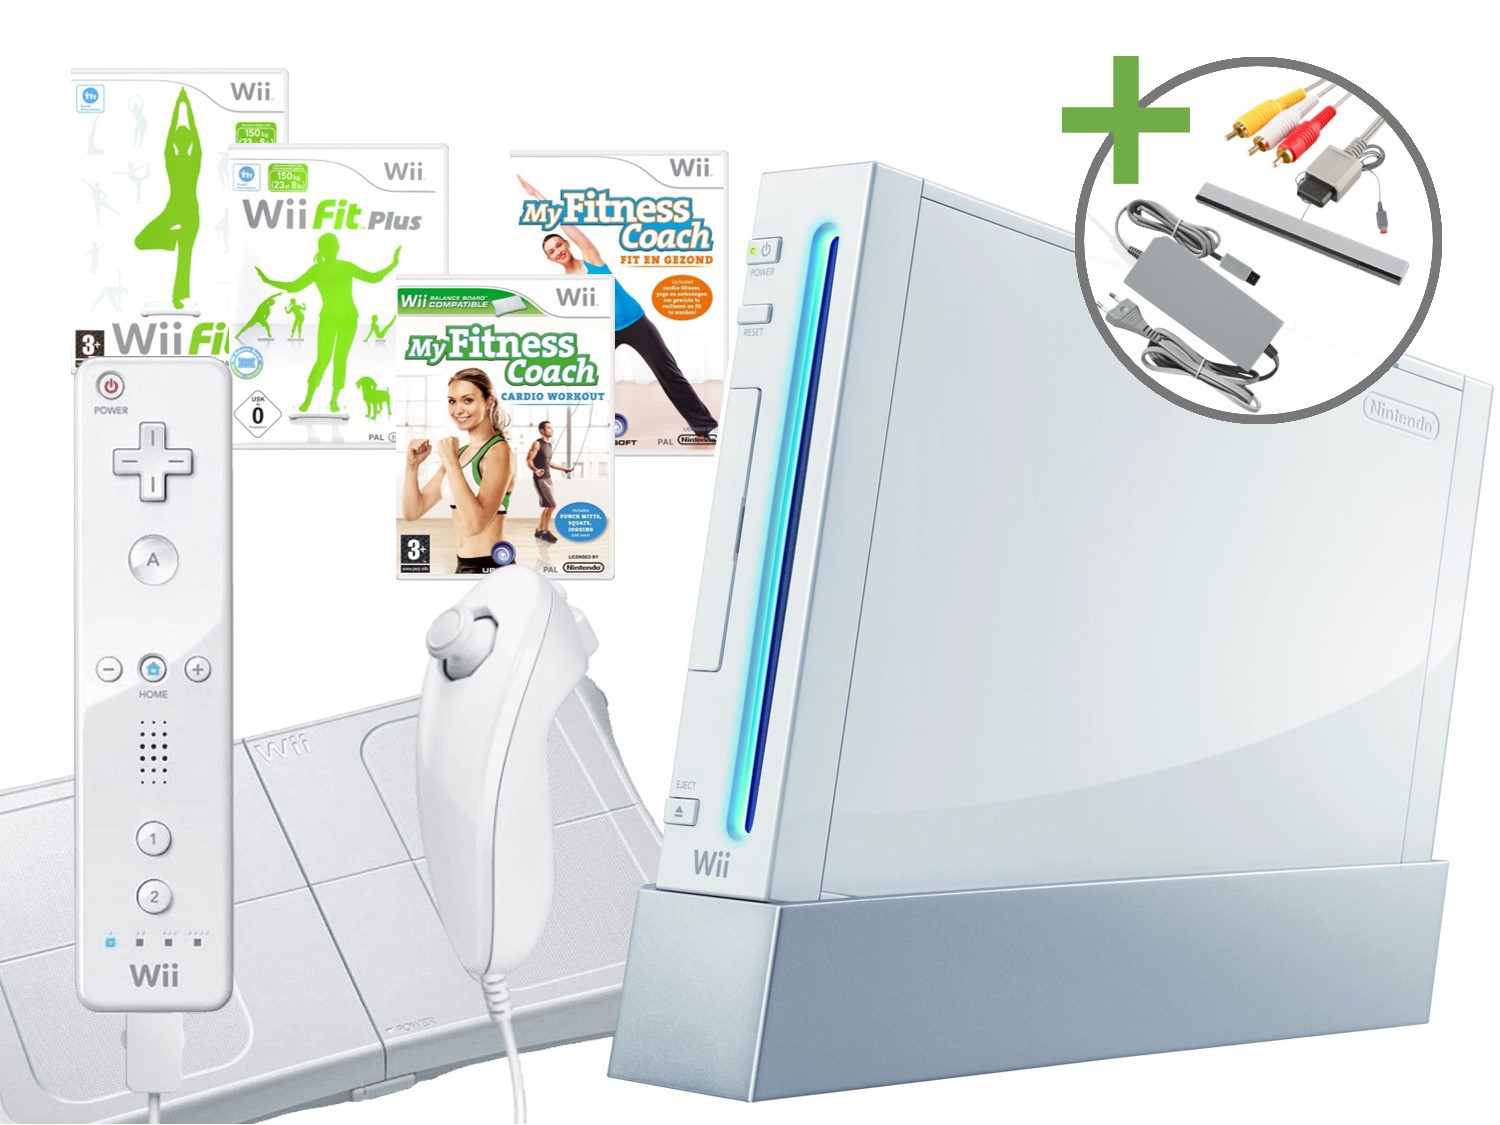 Nintendo Wii Starter Pack - The First of January Edition Kopen | Wii Hardware